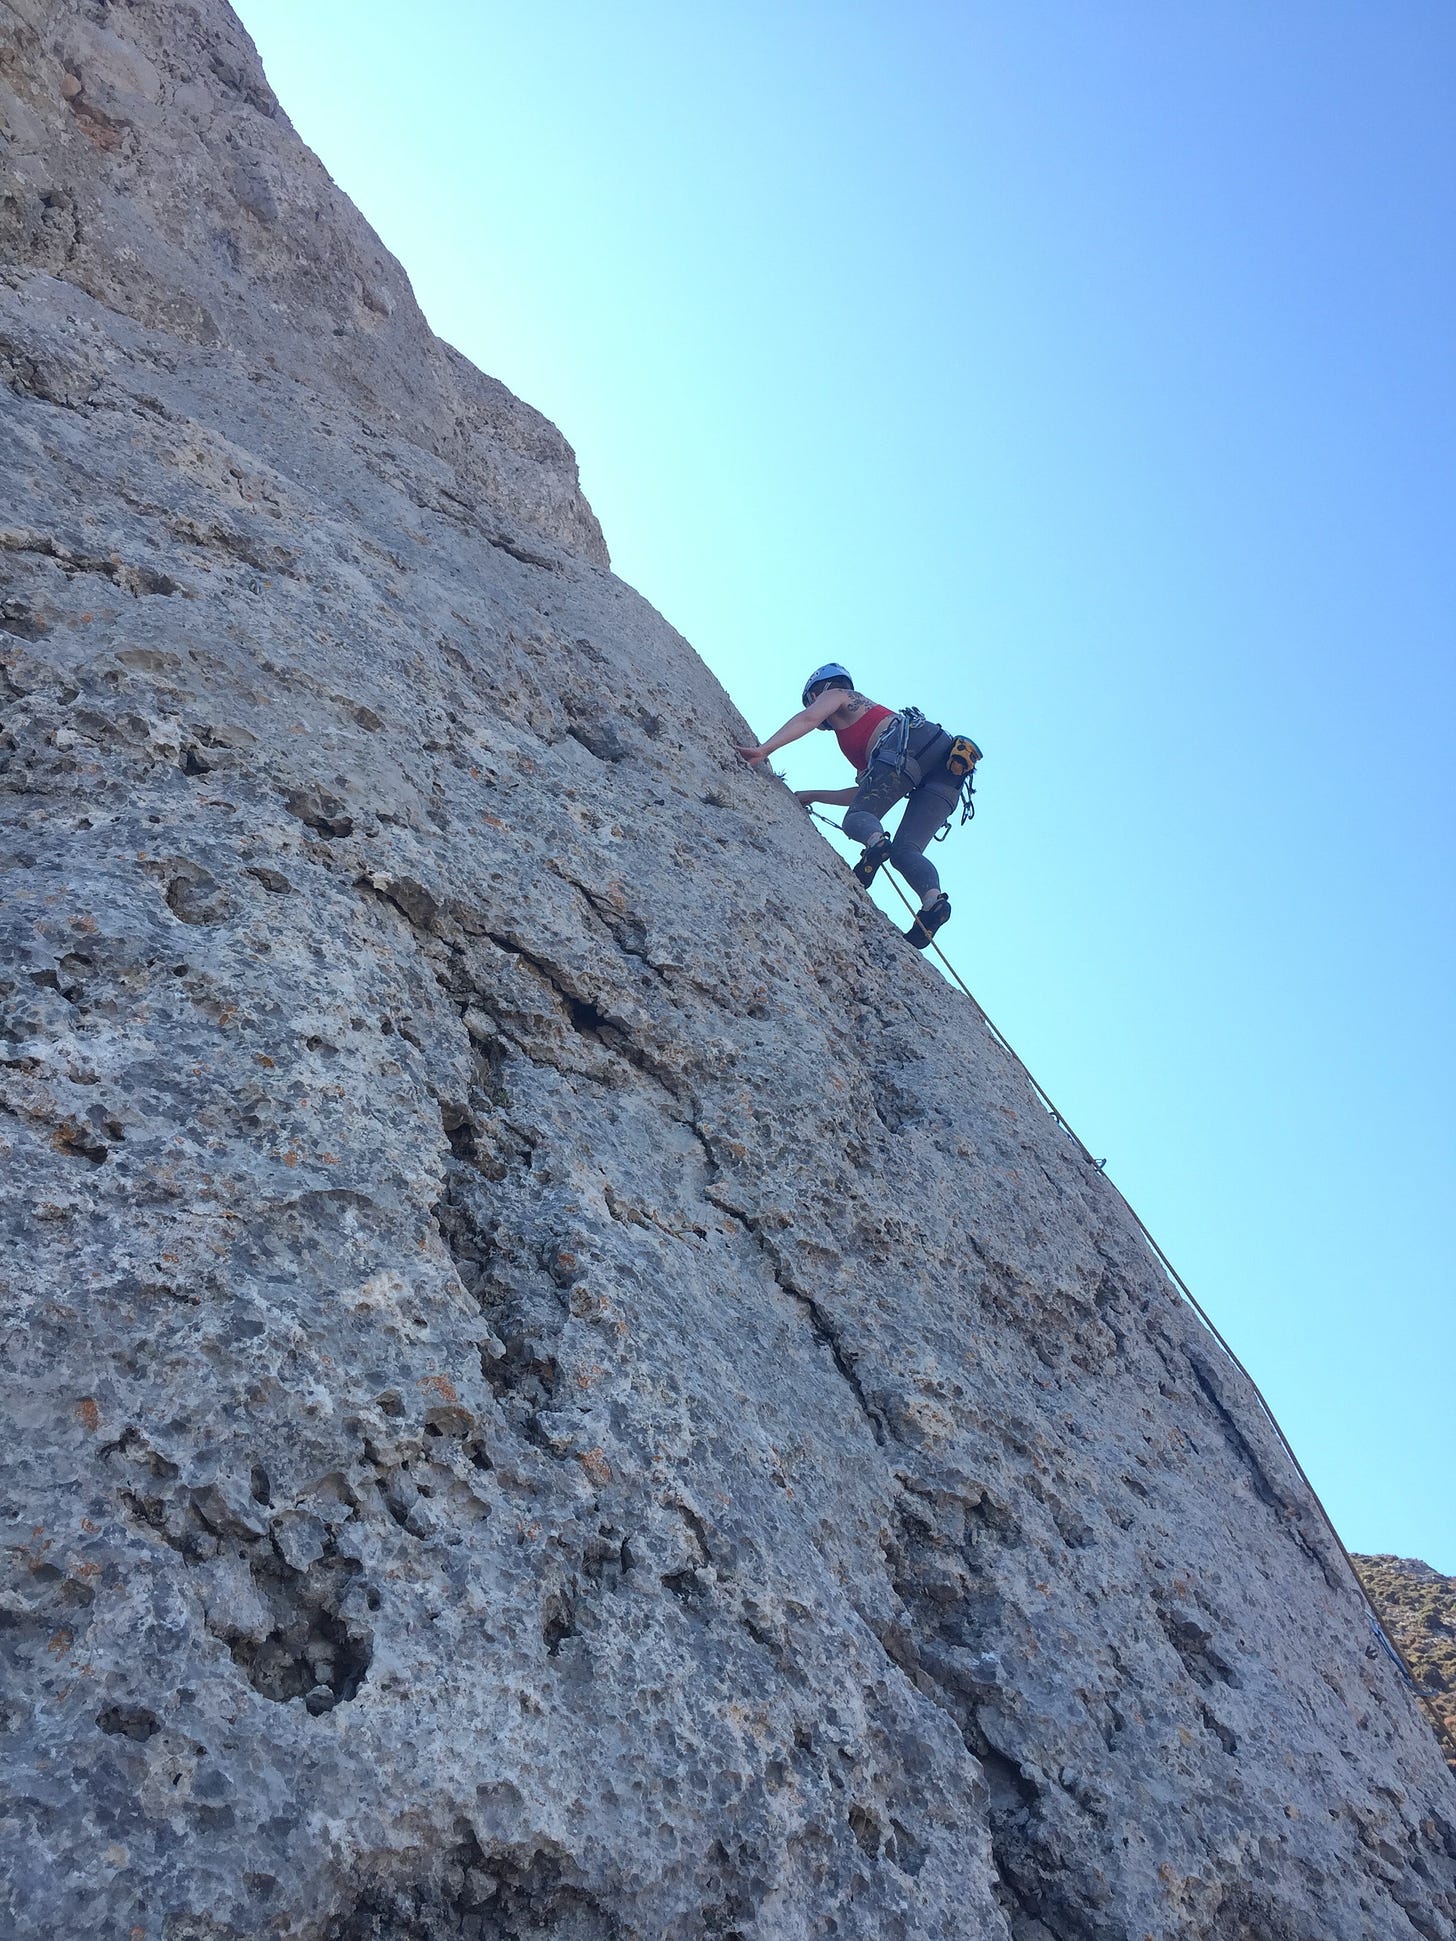 Vicky on a very steep rock face in Kalymnos, blue sky behind, climbing with ropes.